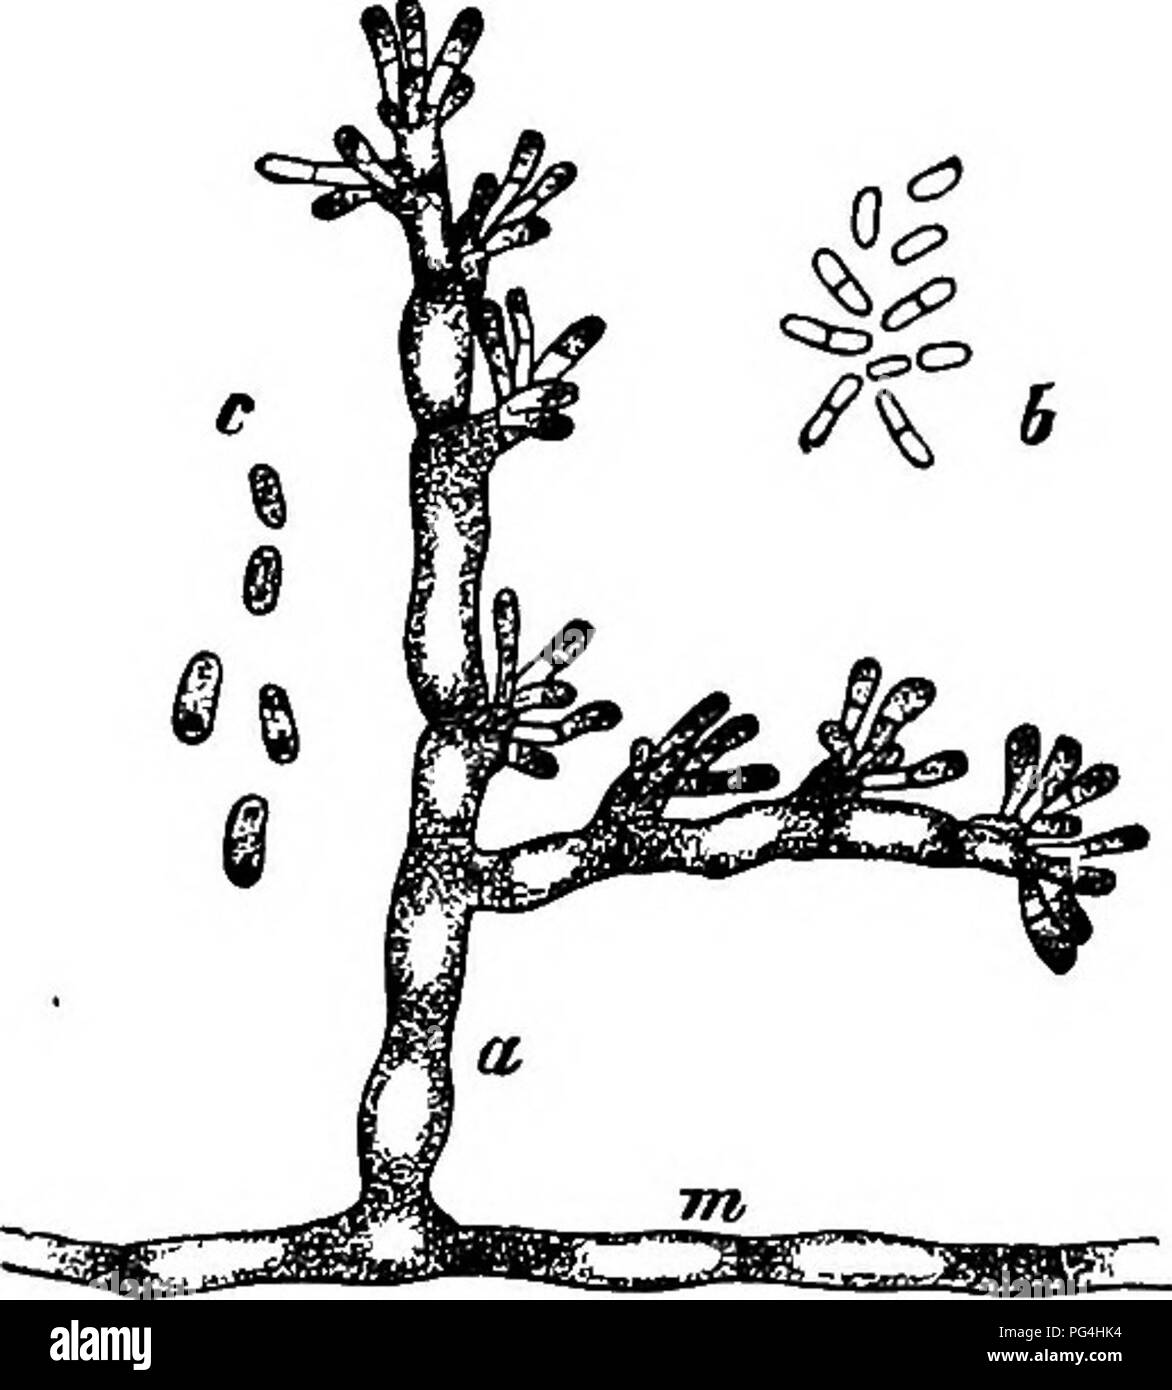 . Comparative morphology and biology of the fungi, mycetozoa and bacteria . Plant morphology; Fungi; Myxomycetes; Bacteriology. 33^ DIVISION II.—COURS£ OF DEVELOPMENT OF FUNGI. sides of hyphal branches, and are divided transversely into shorter rods before or after abscision (Fig. i6i). These small rods are very abundahtly and frequently pro- duced in some species, as for instance in Coprinus lagopus, but not in all the individuals which form basidia. In other species, as C. ephemeroides, they are few and rare; in C. stercorarius, as may be gathered from what has been said above, they do not o Stock Photo